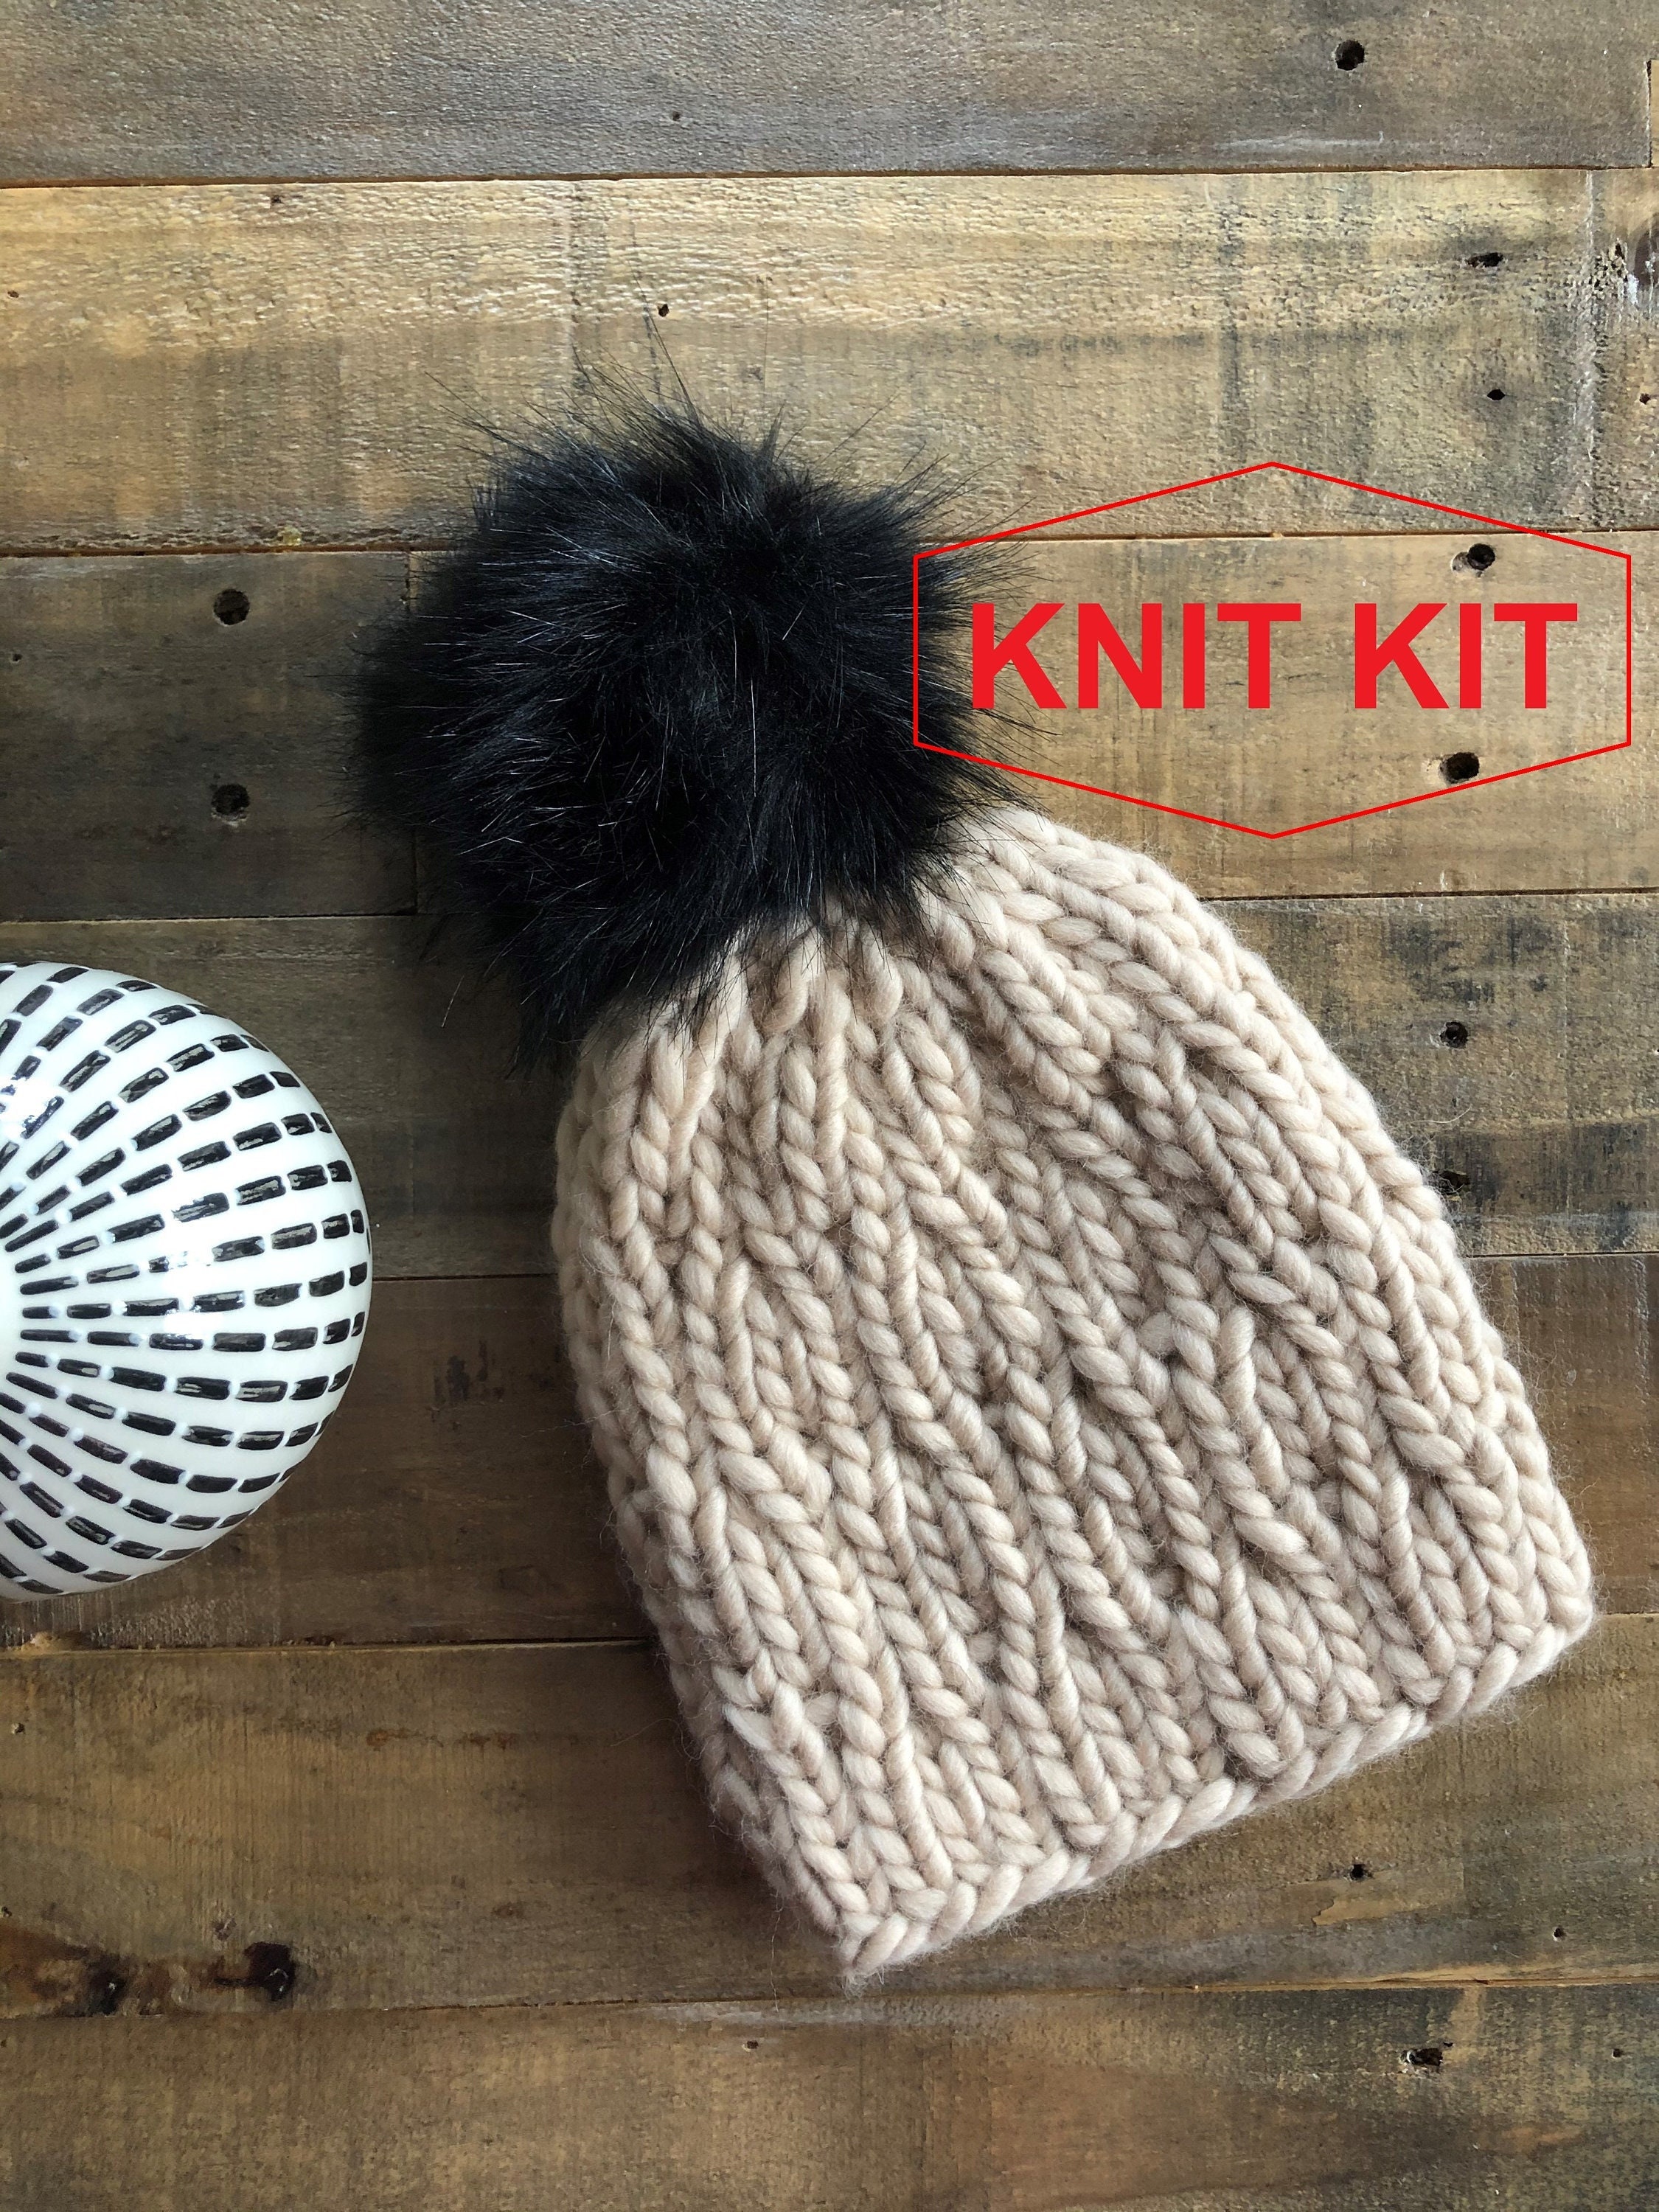 Easy Knitted Ear Warmer Kit: A Beginning Knitting Project 